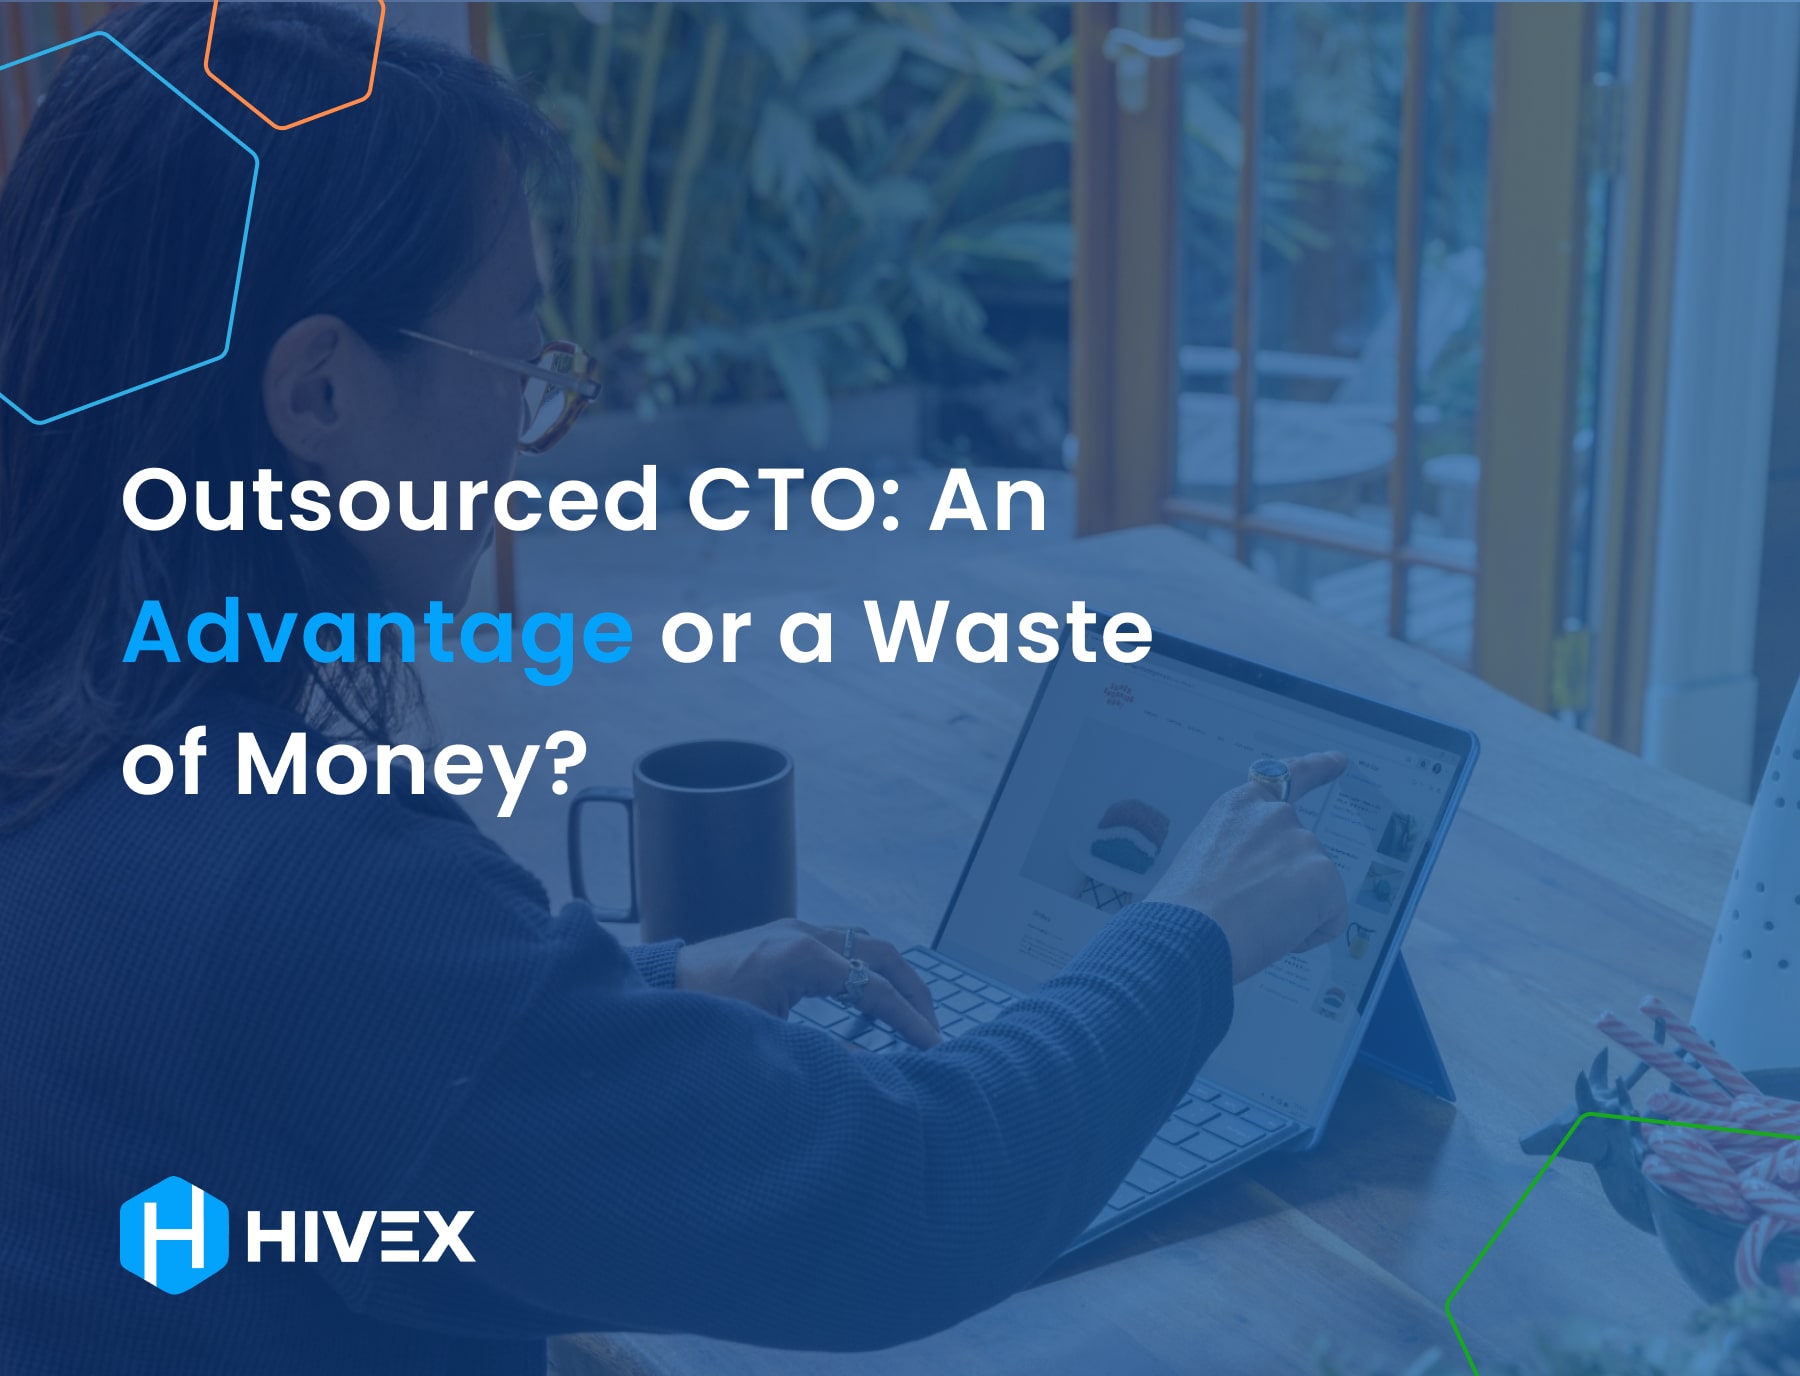 Outsourced CTO: An Advantage or a Waste of Money?